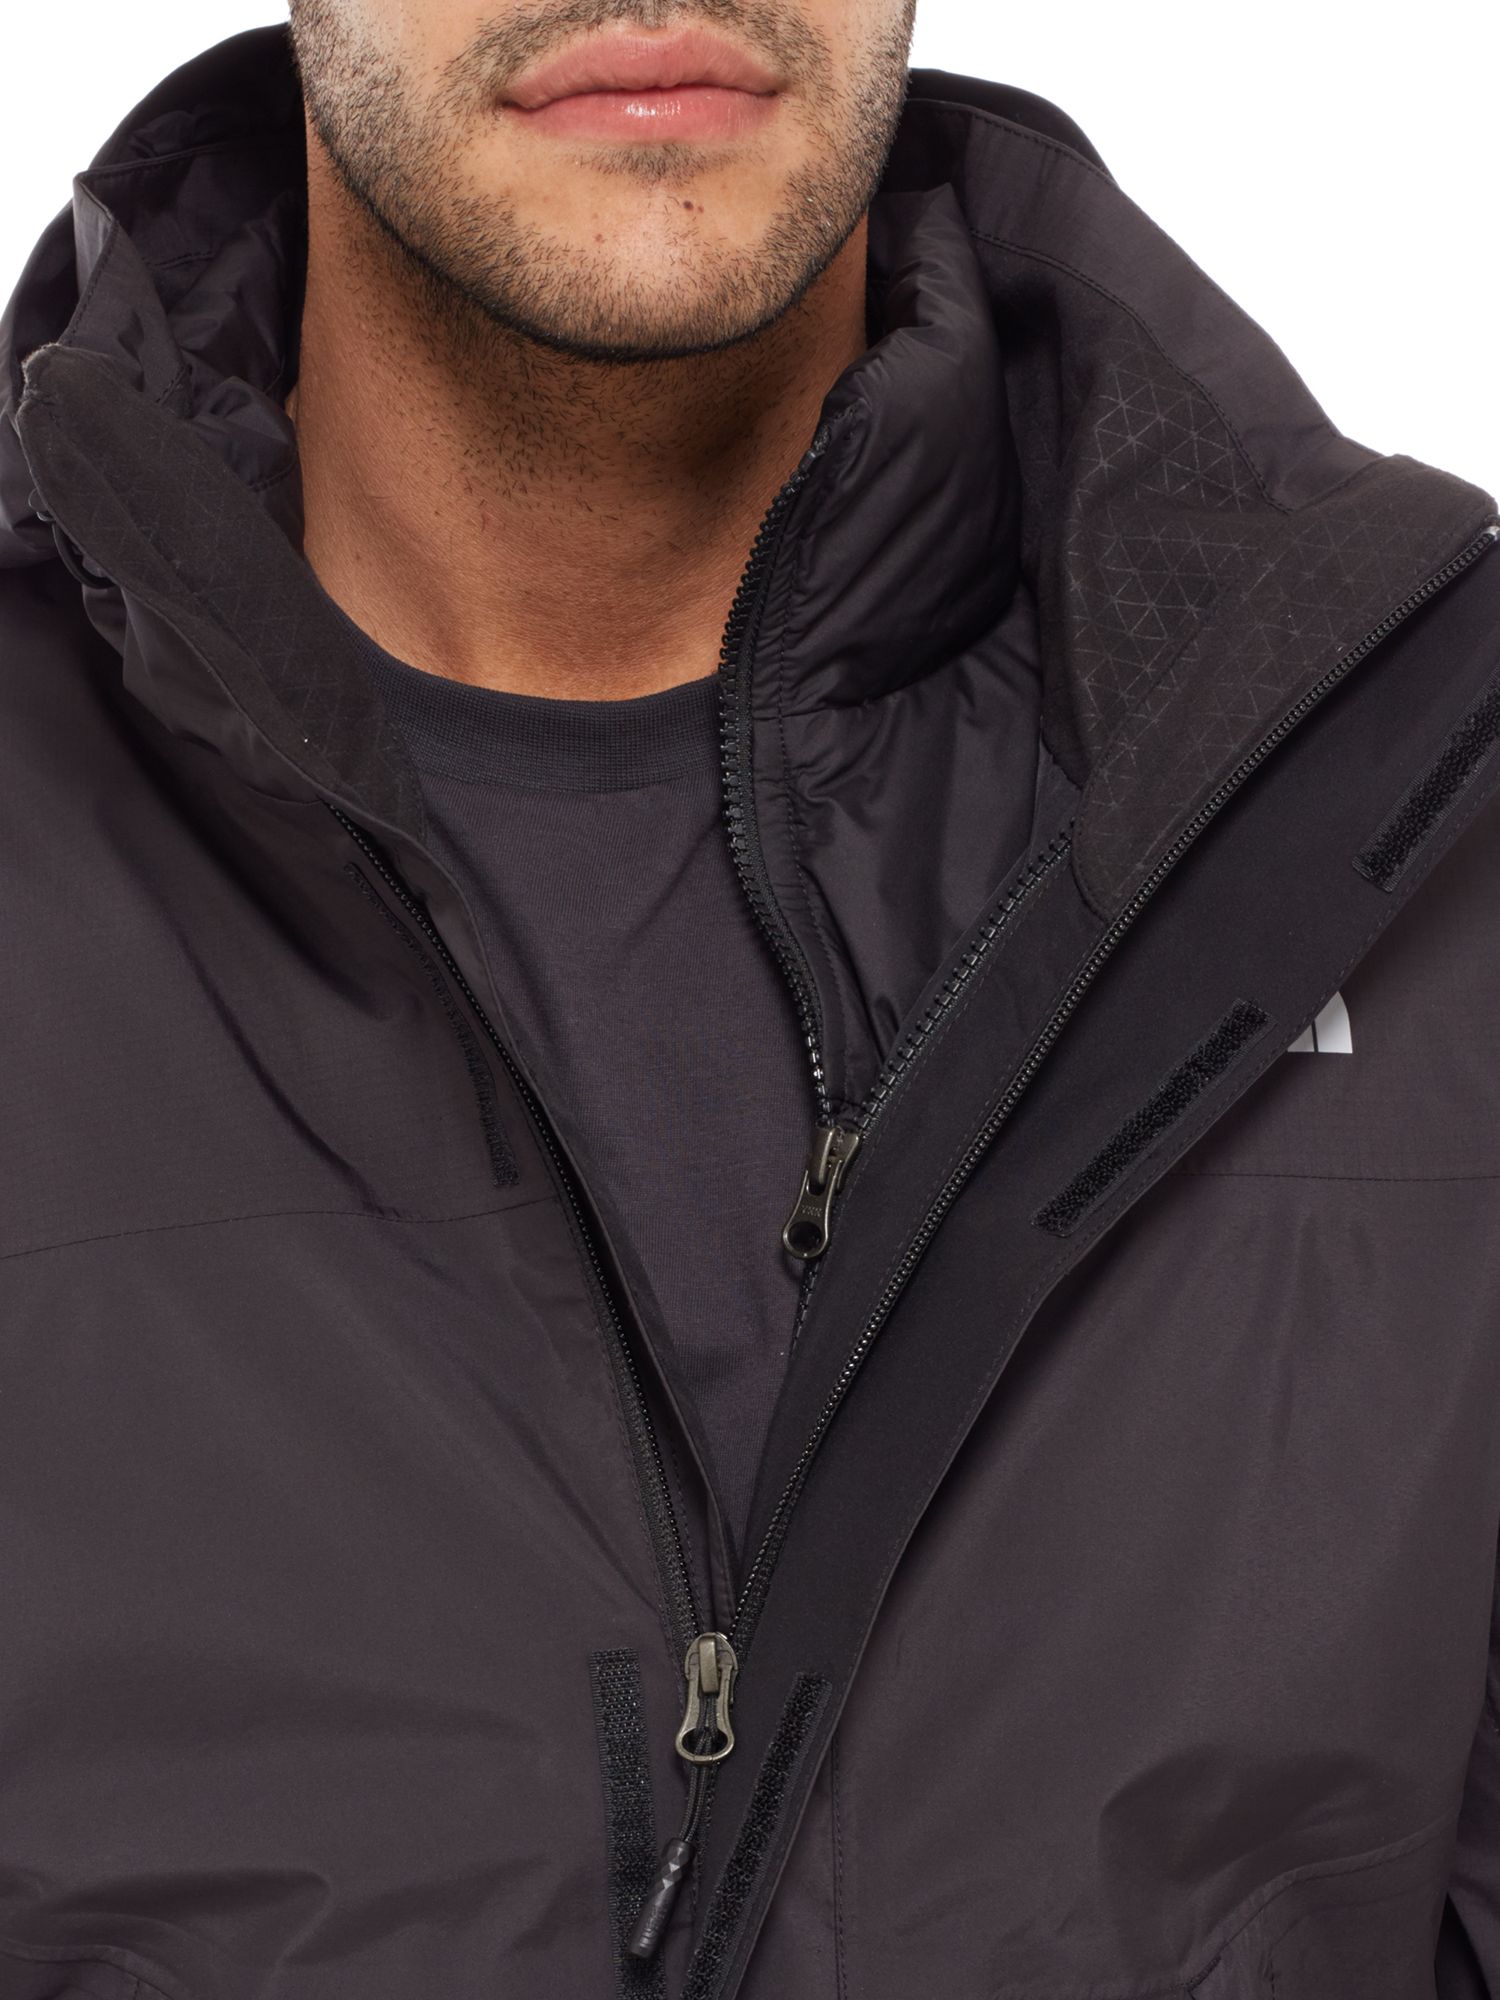 the north face men's mountain light triclimate jacket